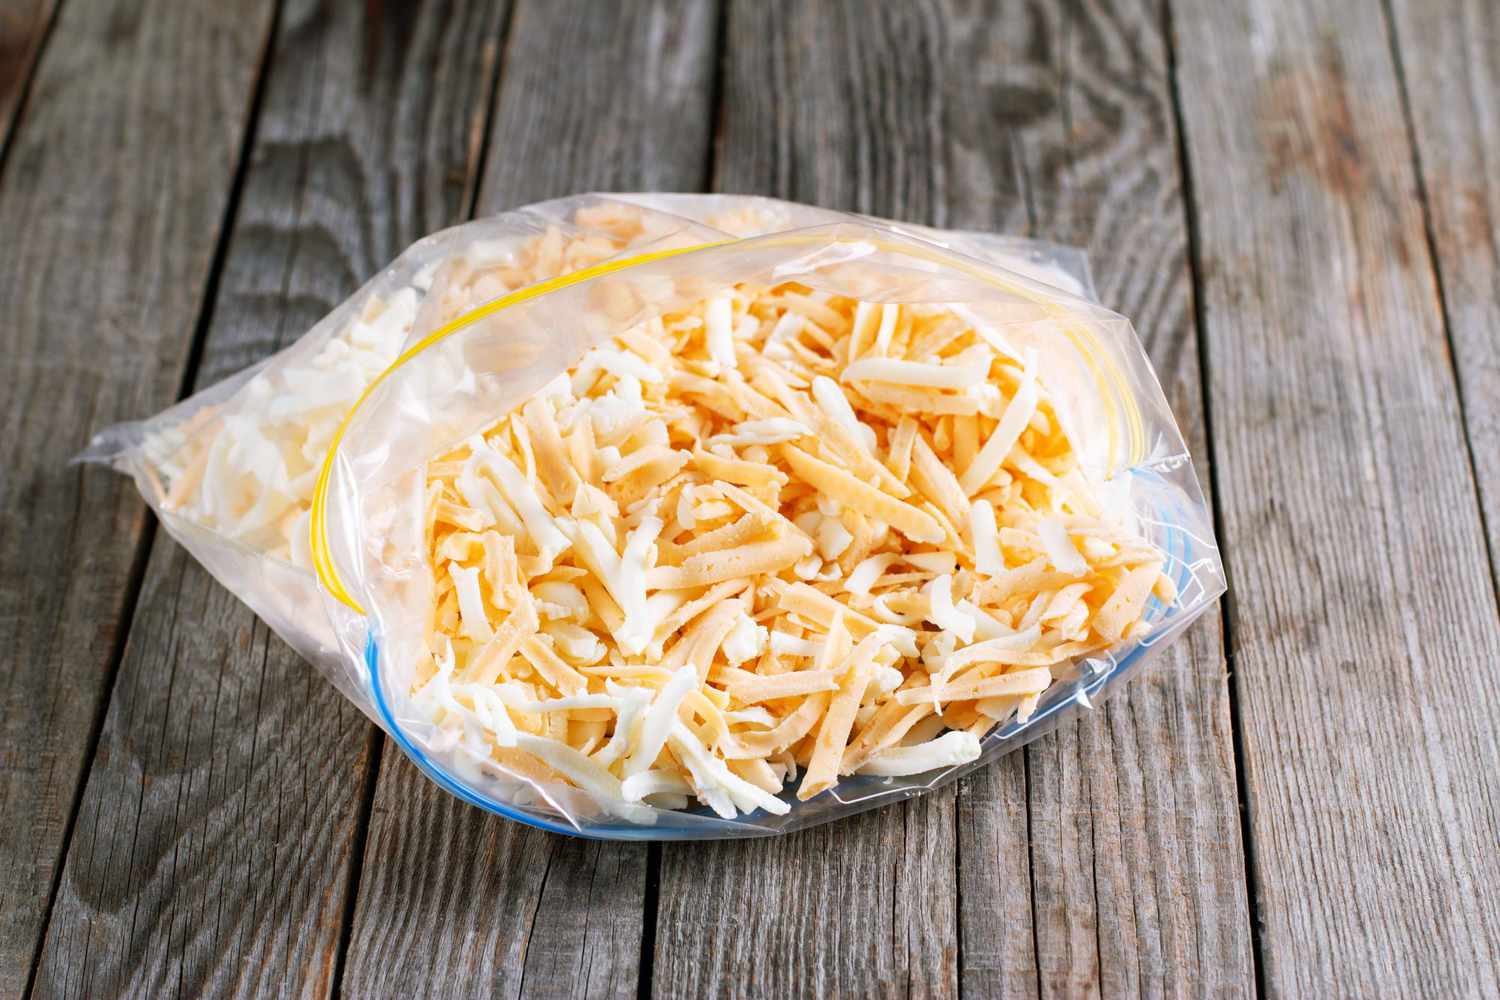 How To Store Shredded Cheese In Fridge